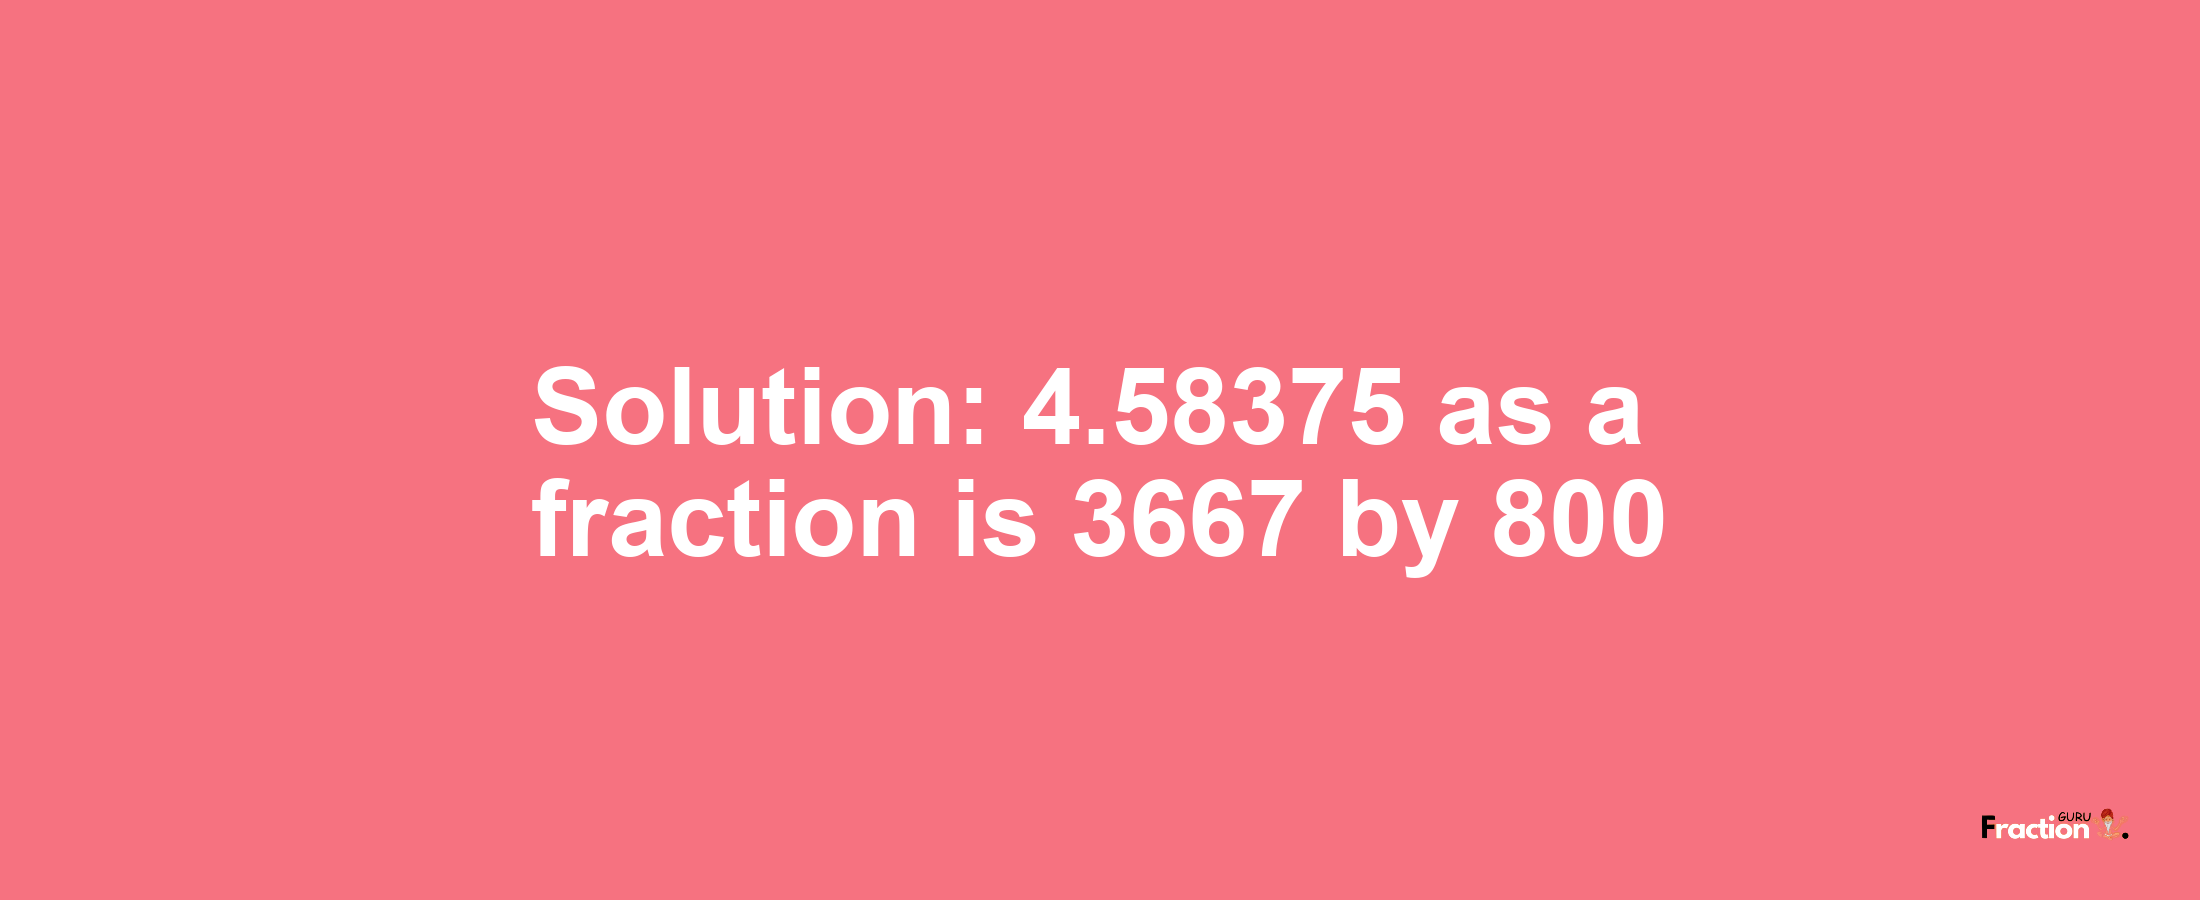 Solution:4.58375 as a fraction is 3667/800